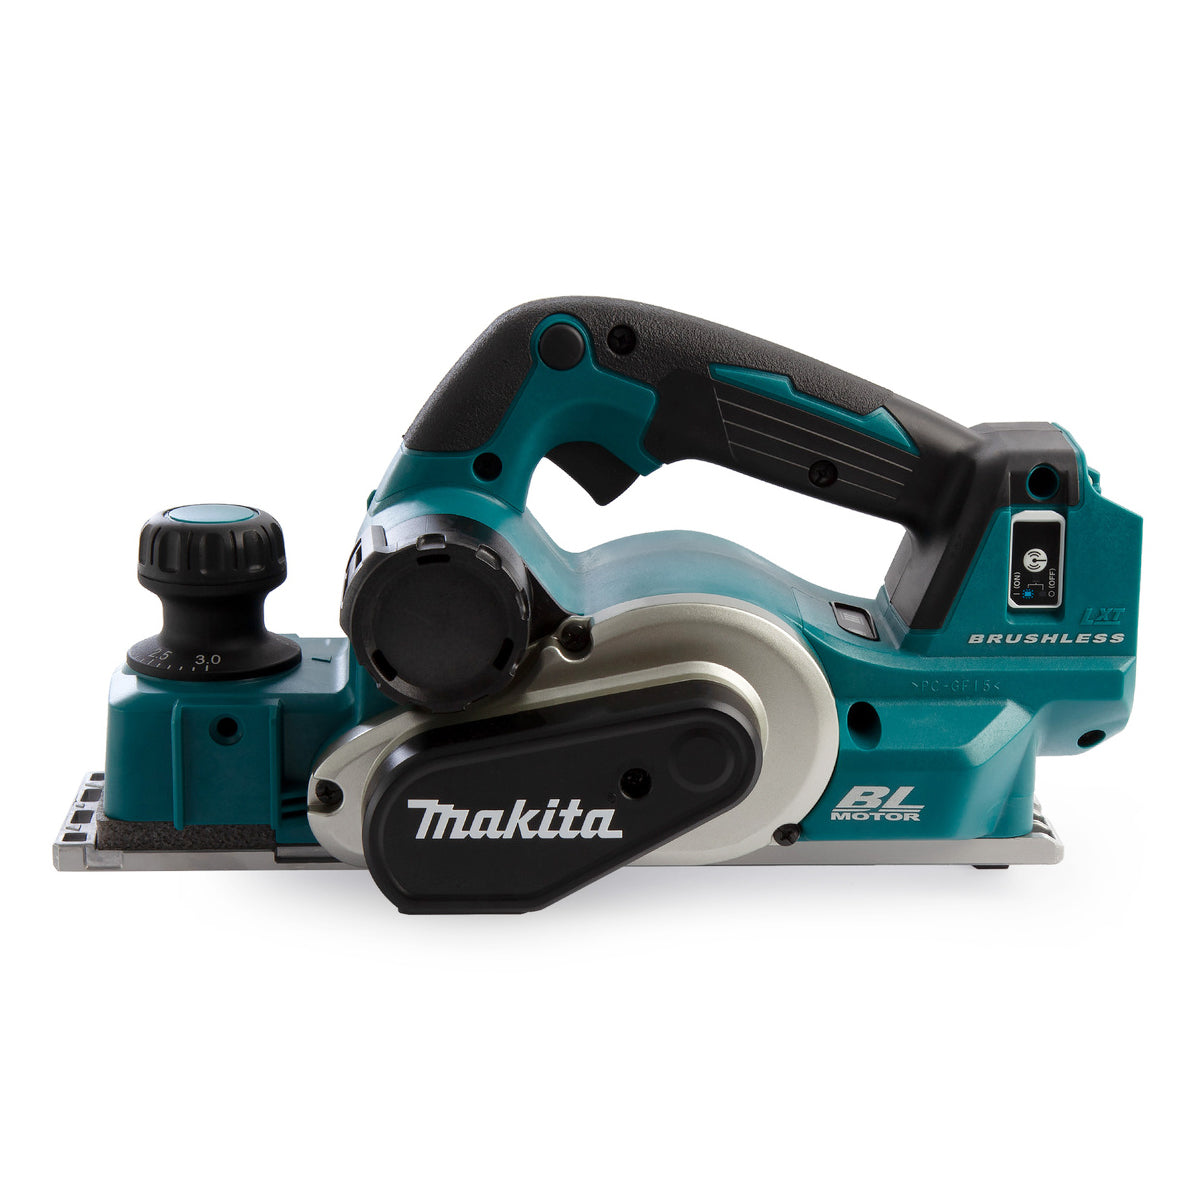 Makita DKP181RTJ 18V LXT Brushless Planer with 2 x 5.0Ah Batteries Charger & Case